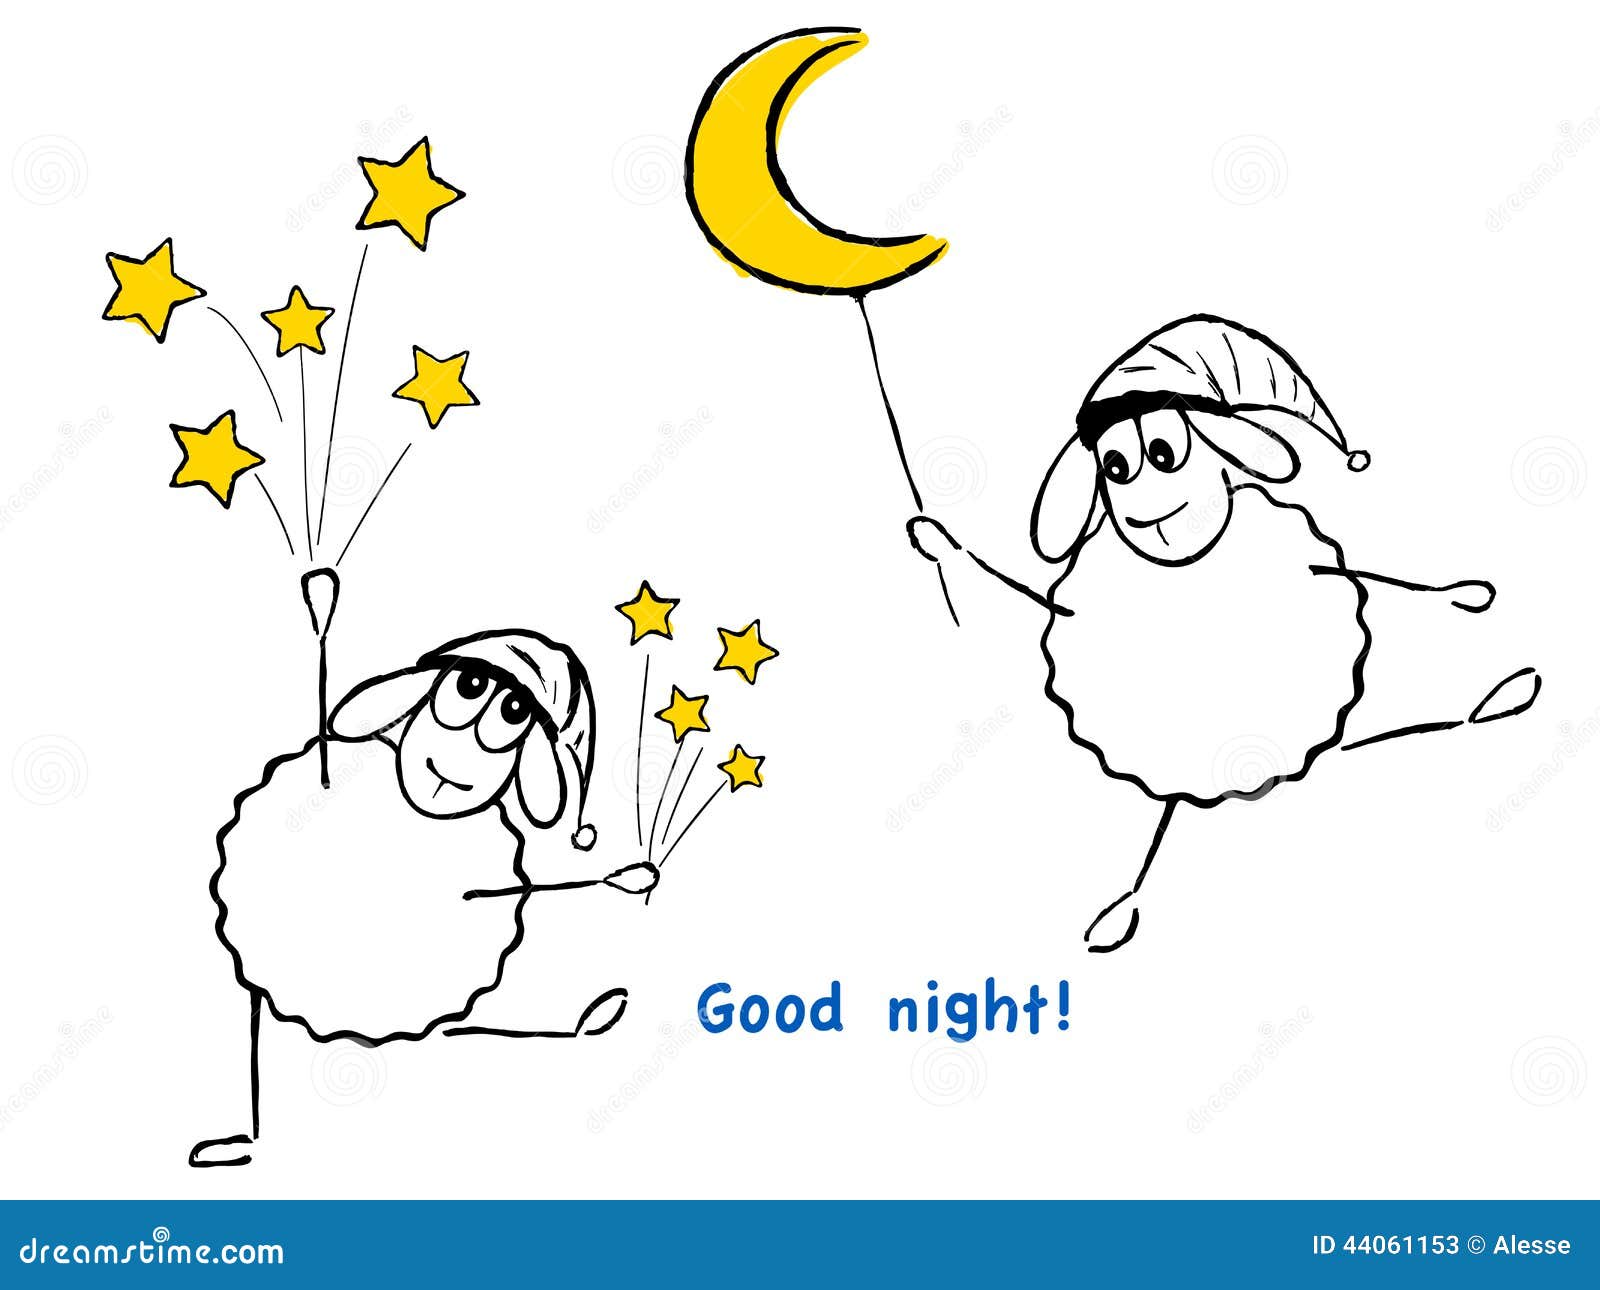 good night clipart images - photo #5